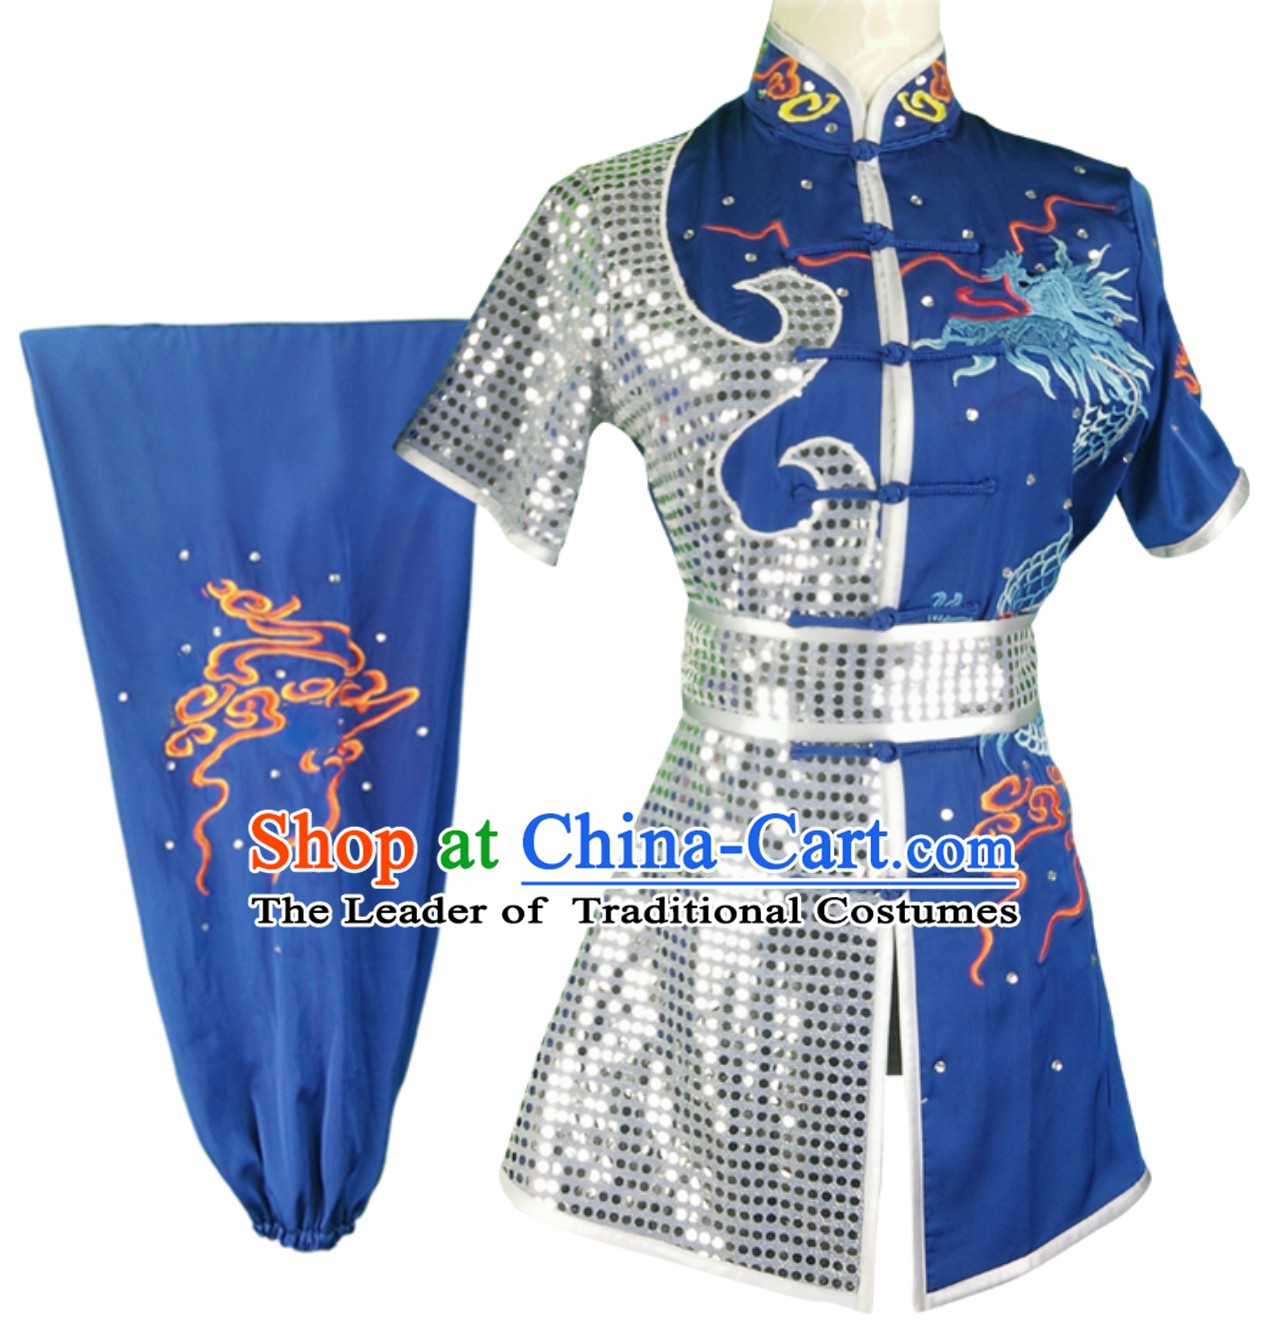 Top Changquan Nanquan Long Fist Southern Fist P Short Sleeves Best and the Most Professional Kung Fu Competition Uniforms Suits